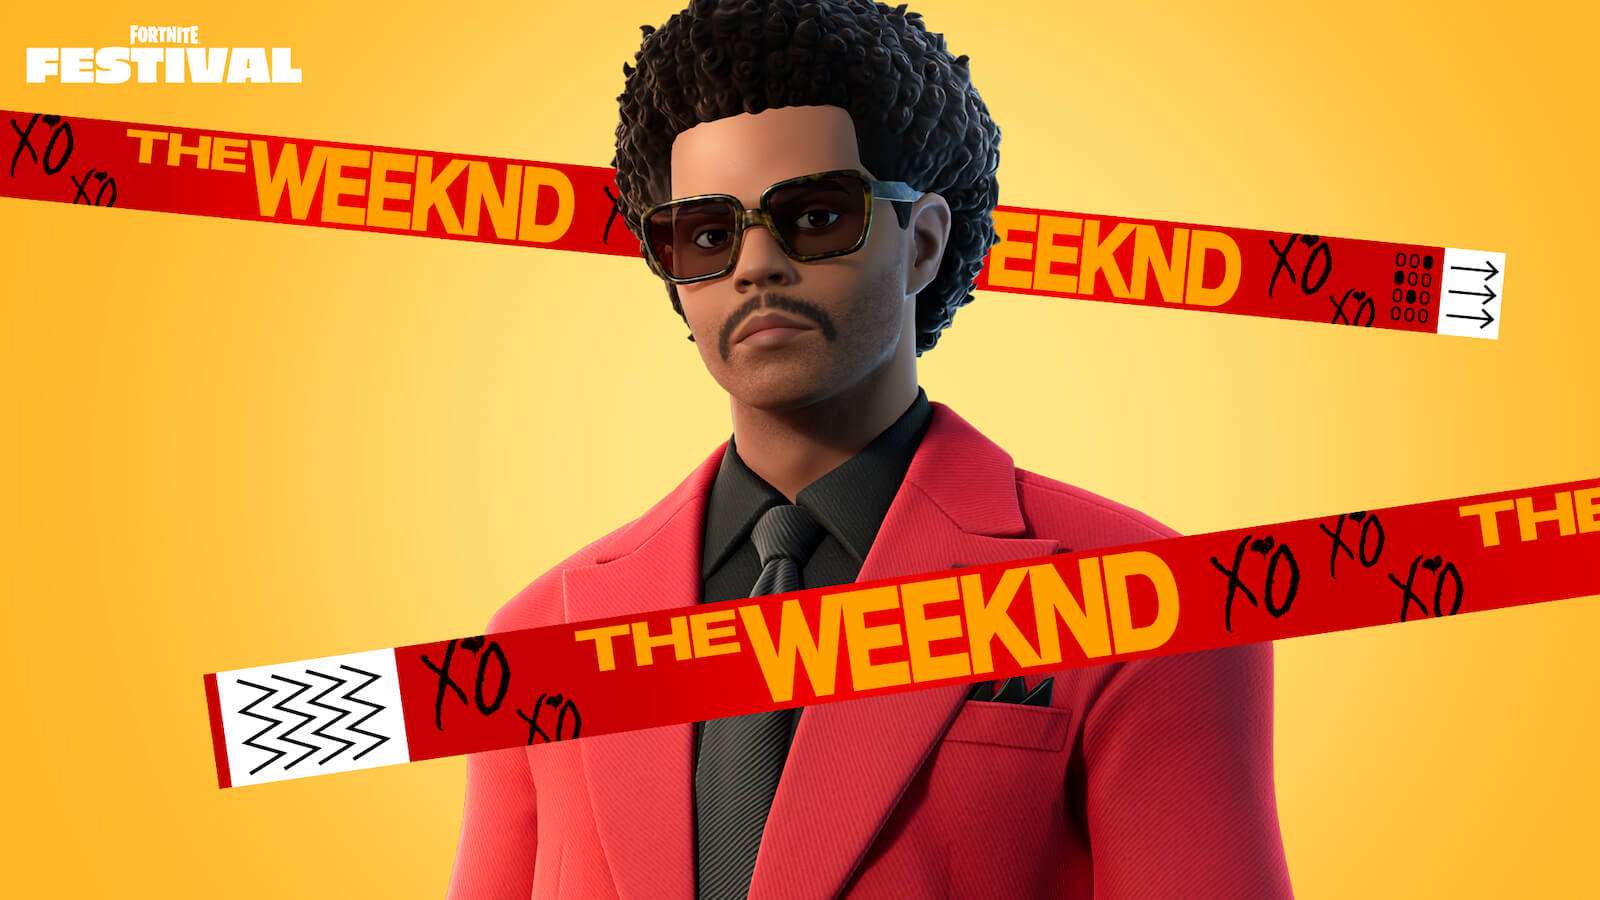 Fortnite players shocked at The Weeknd being “sweaty” at the game